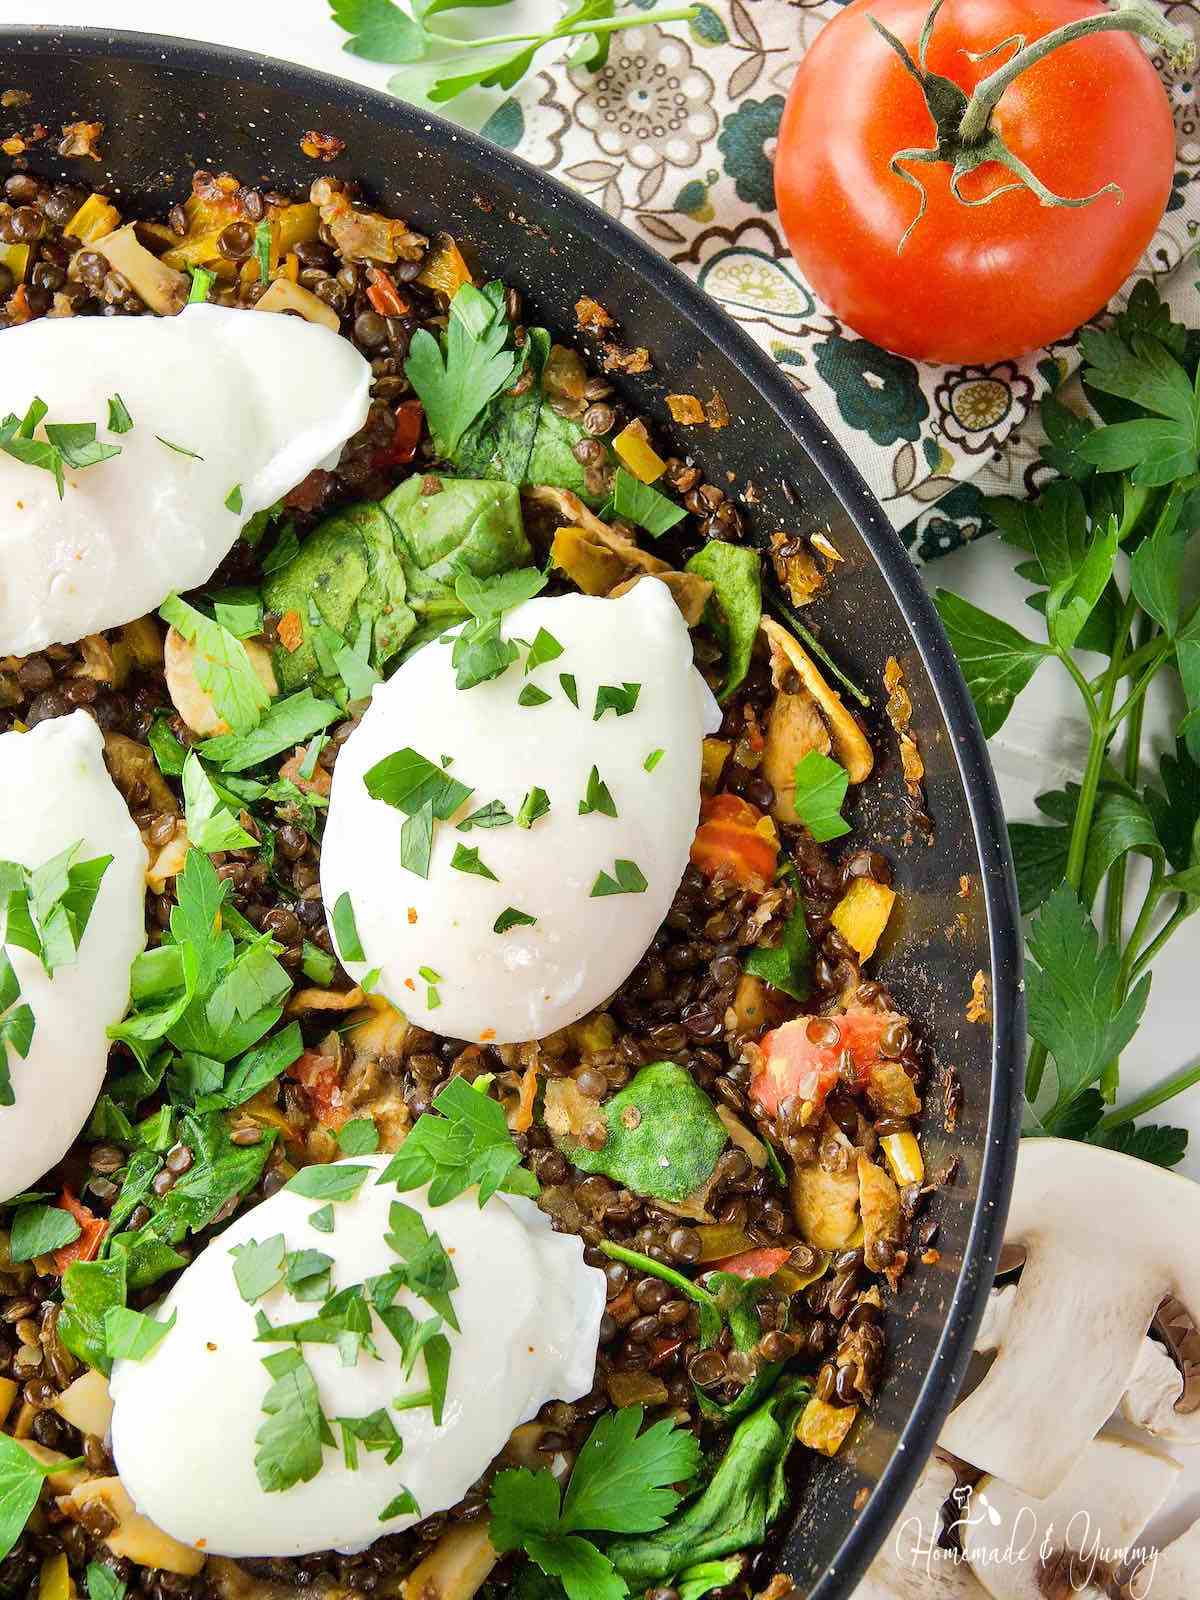 Poached Eggs and Lentil Hash ready to eat.